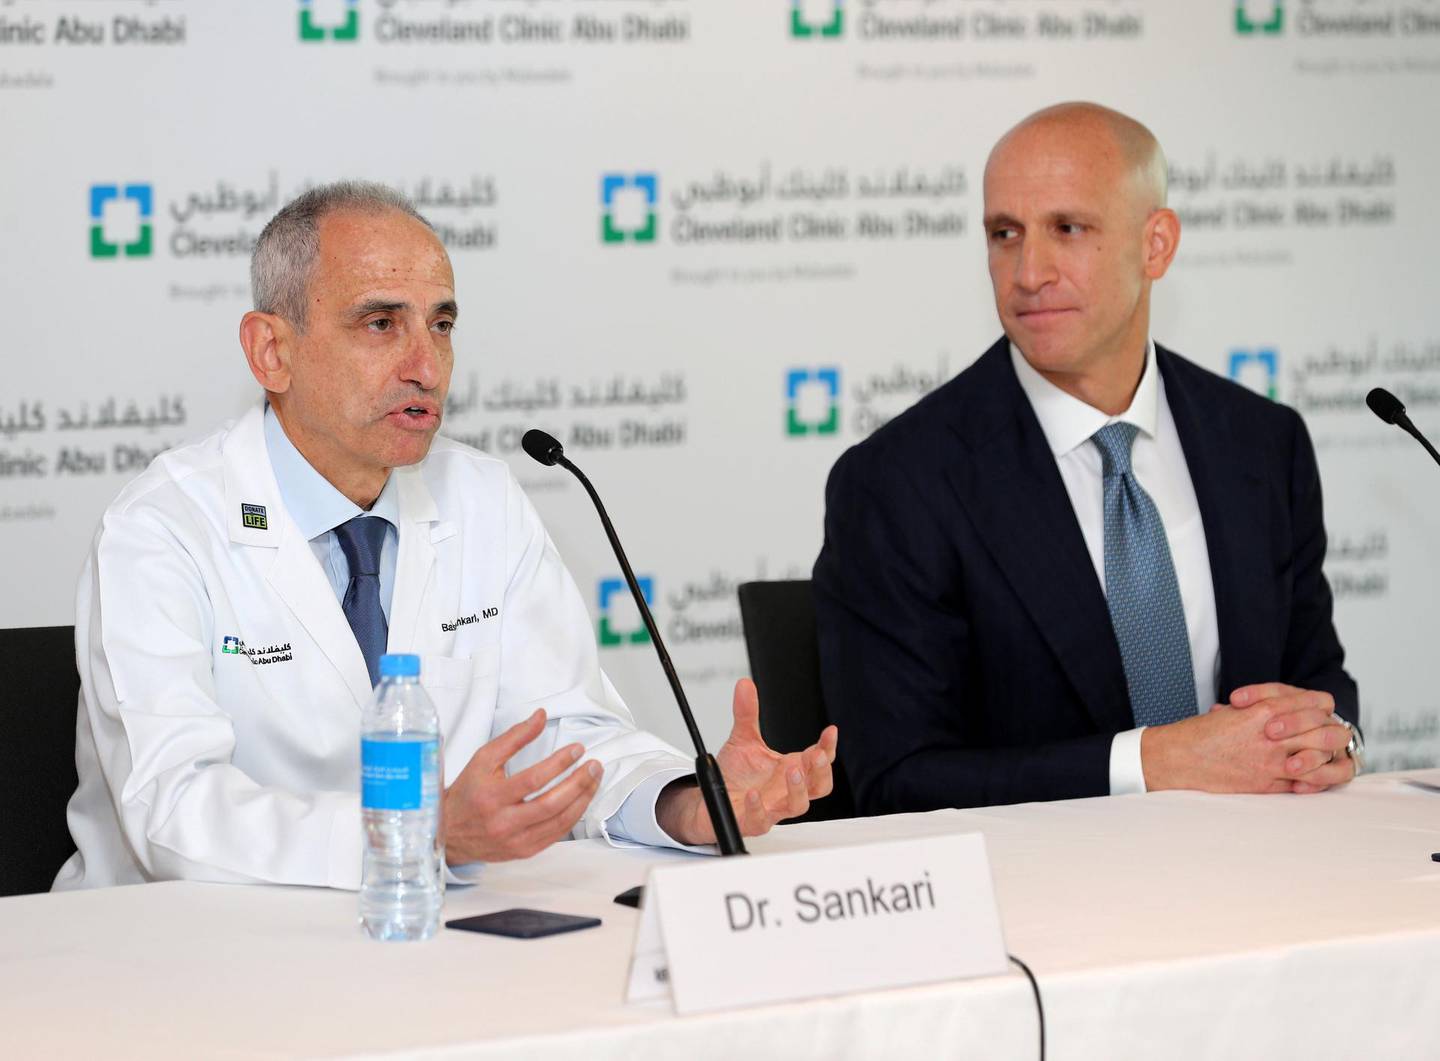 Abu Dhabi, United Arab Emirates - February 20th, 2018: Dr Bashir Sankari, the chief of the surgical subspecialties institute at Cleveland Clinic Abu Dhabi. Press conference to celebrate the clinical milestone of the UAE's first transplants from deceased donors for all four major organs "The Gift Of Life - Major Organ Transplants in The UAE". Tuesday, February 20th, 2018. Cleveland Clinic, Abu Dhabi. Chris Whiteoak / The National